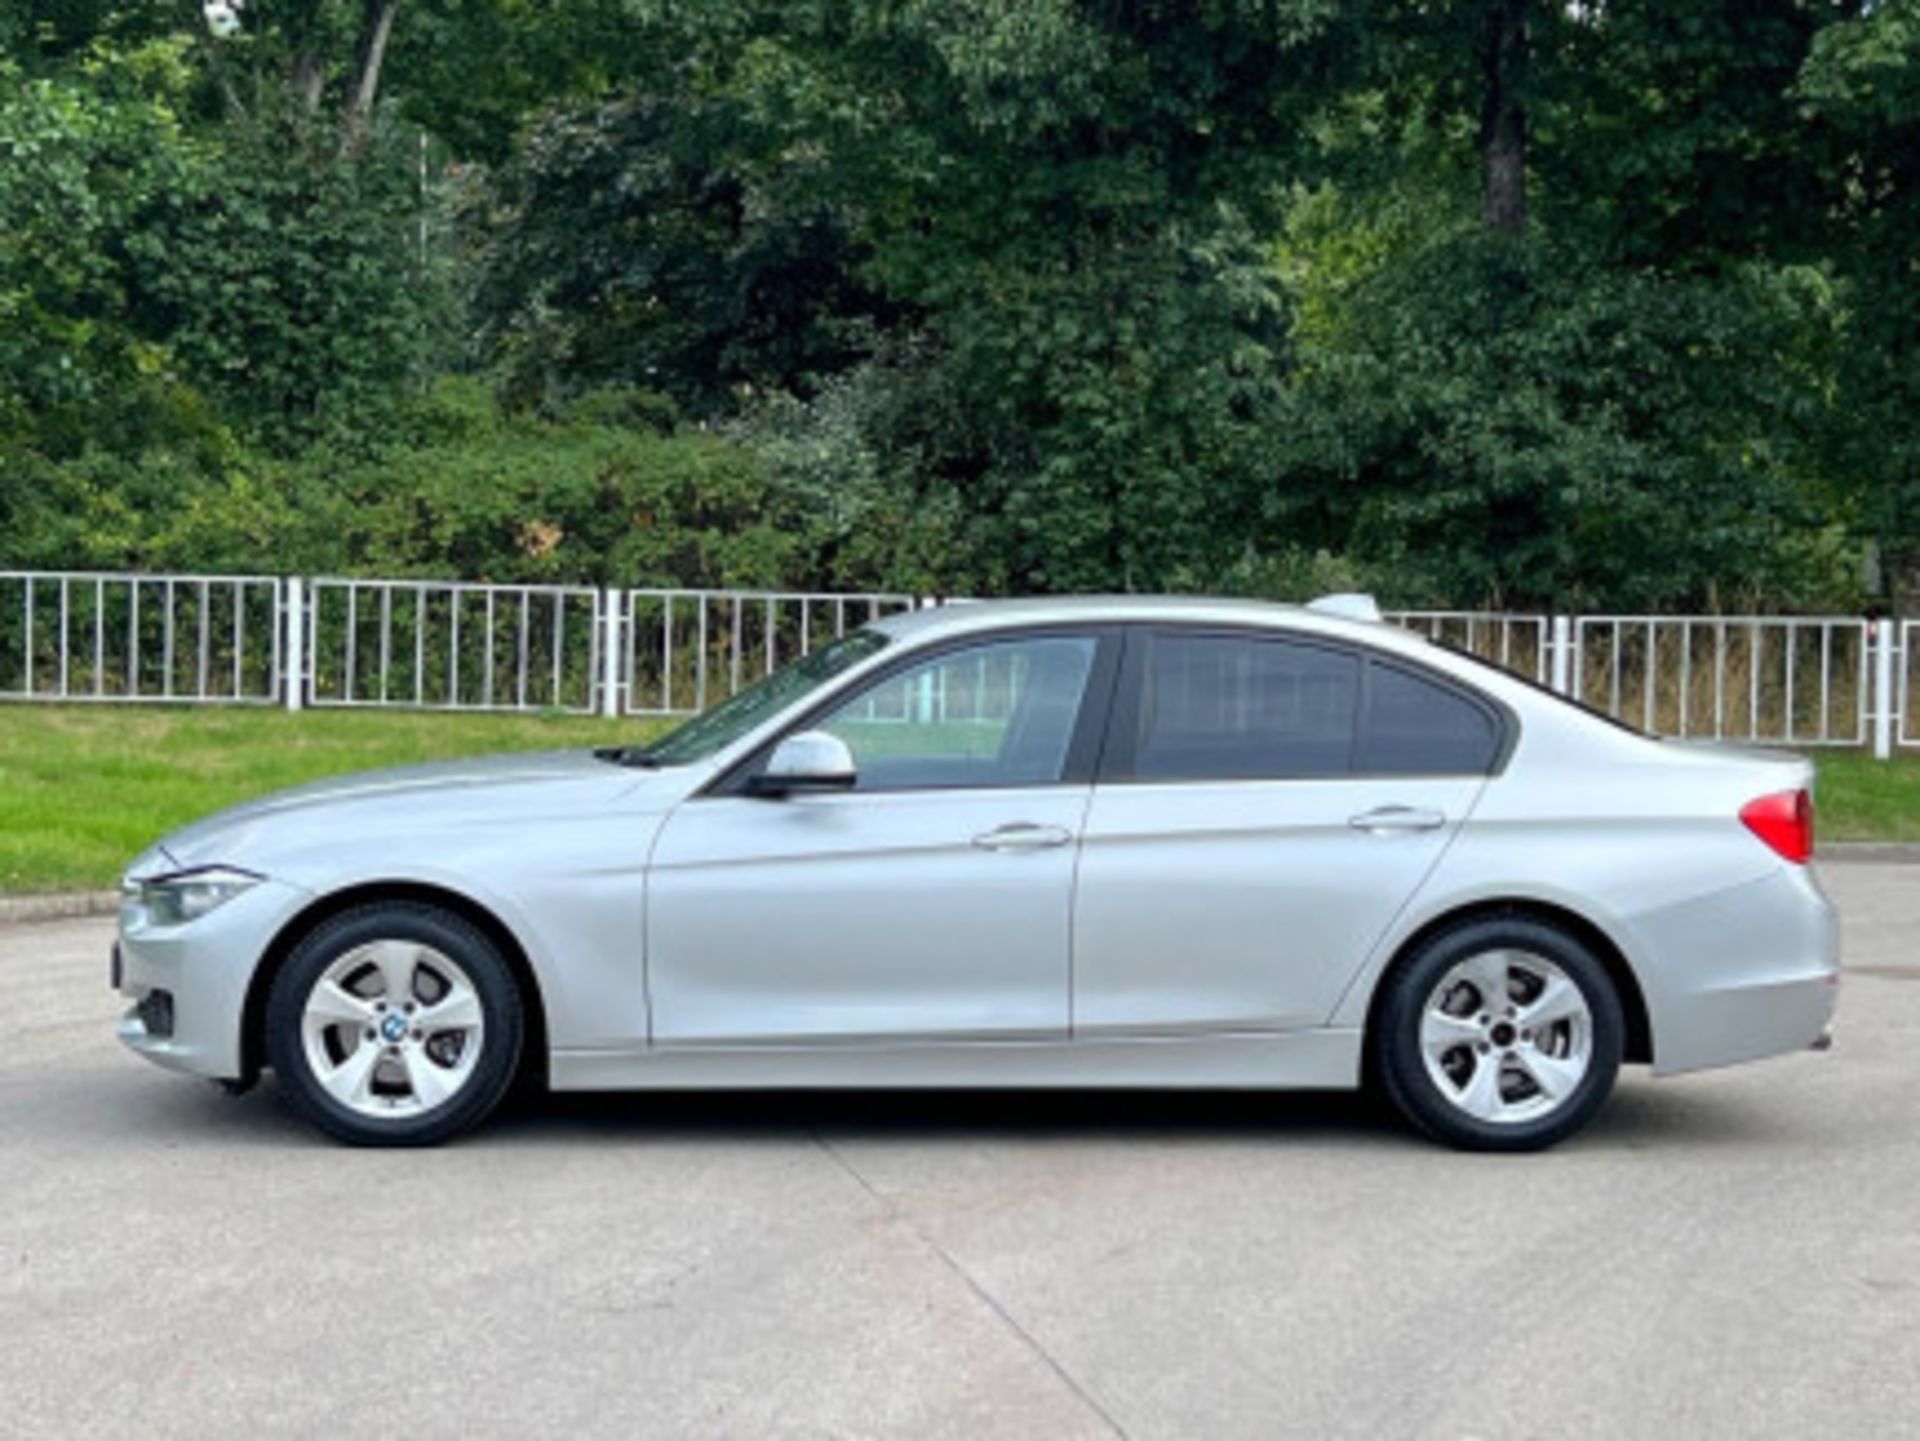 BMW 3 SERIES 2.0 DIESEL ED START STOP - A WELL-MAINTAINED GEM >>--NO VAT ON HAMMER--<< - Image 122 of 229